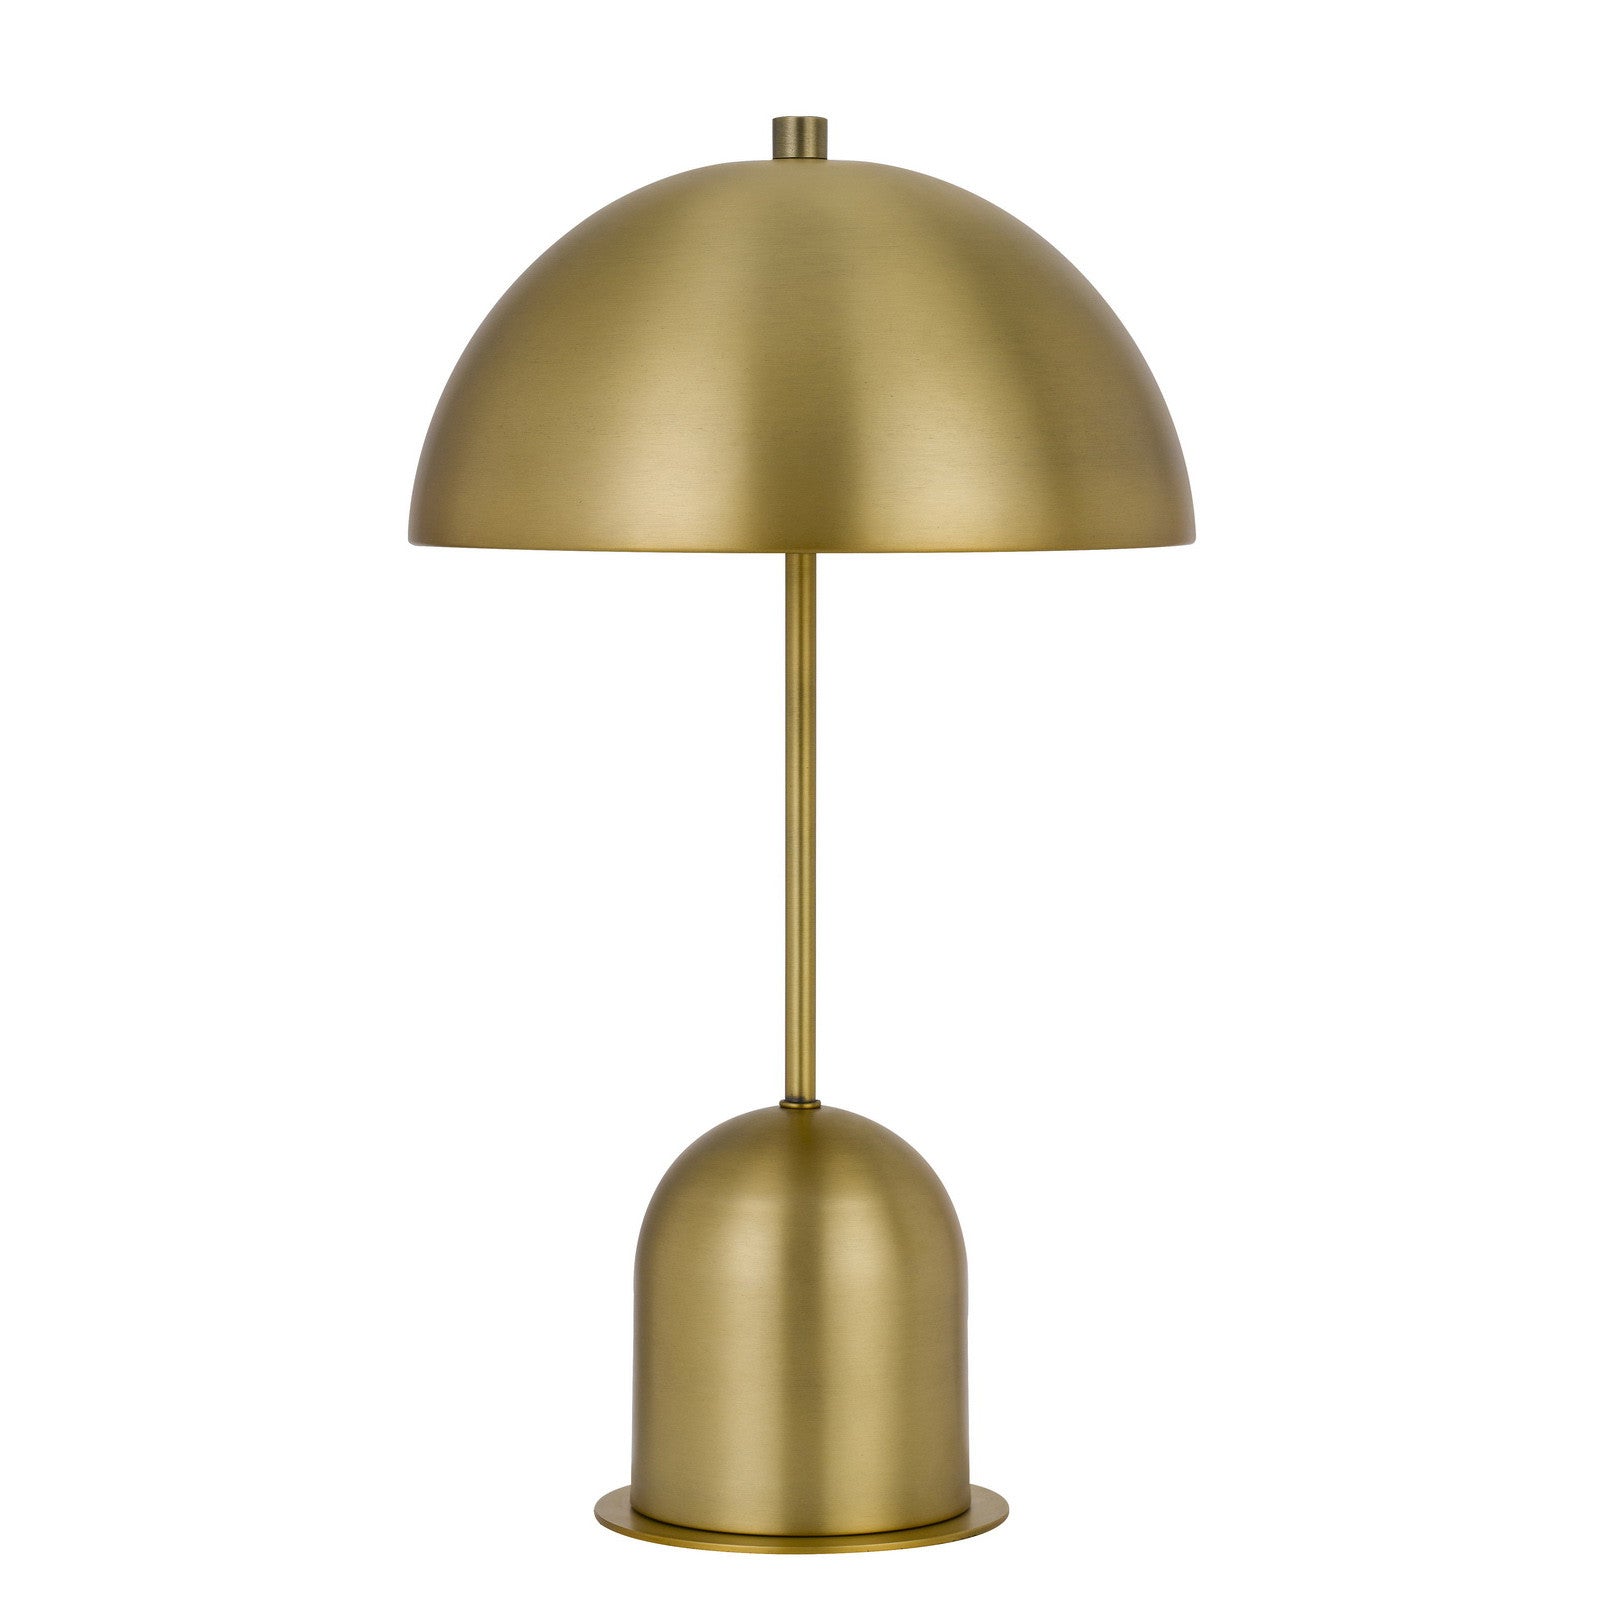 20" Antiqued Brass Metal Desk Table Lamp With Antiqued Brass Dome Shade